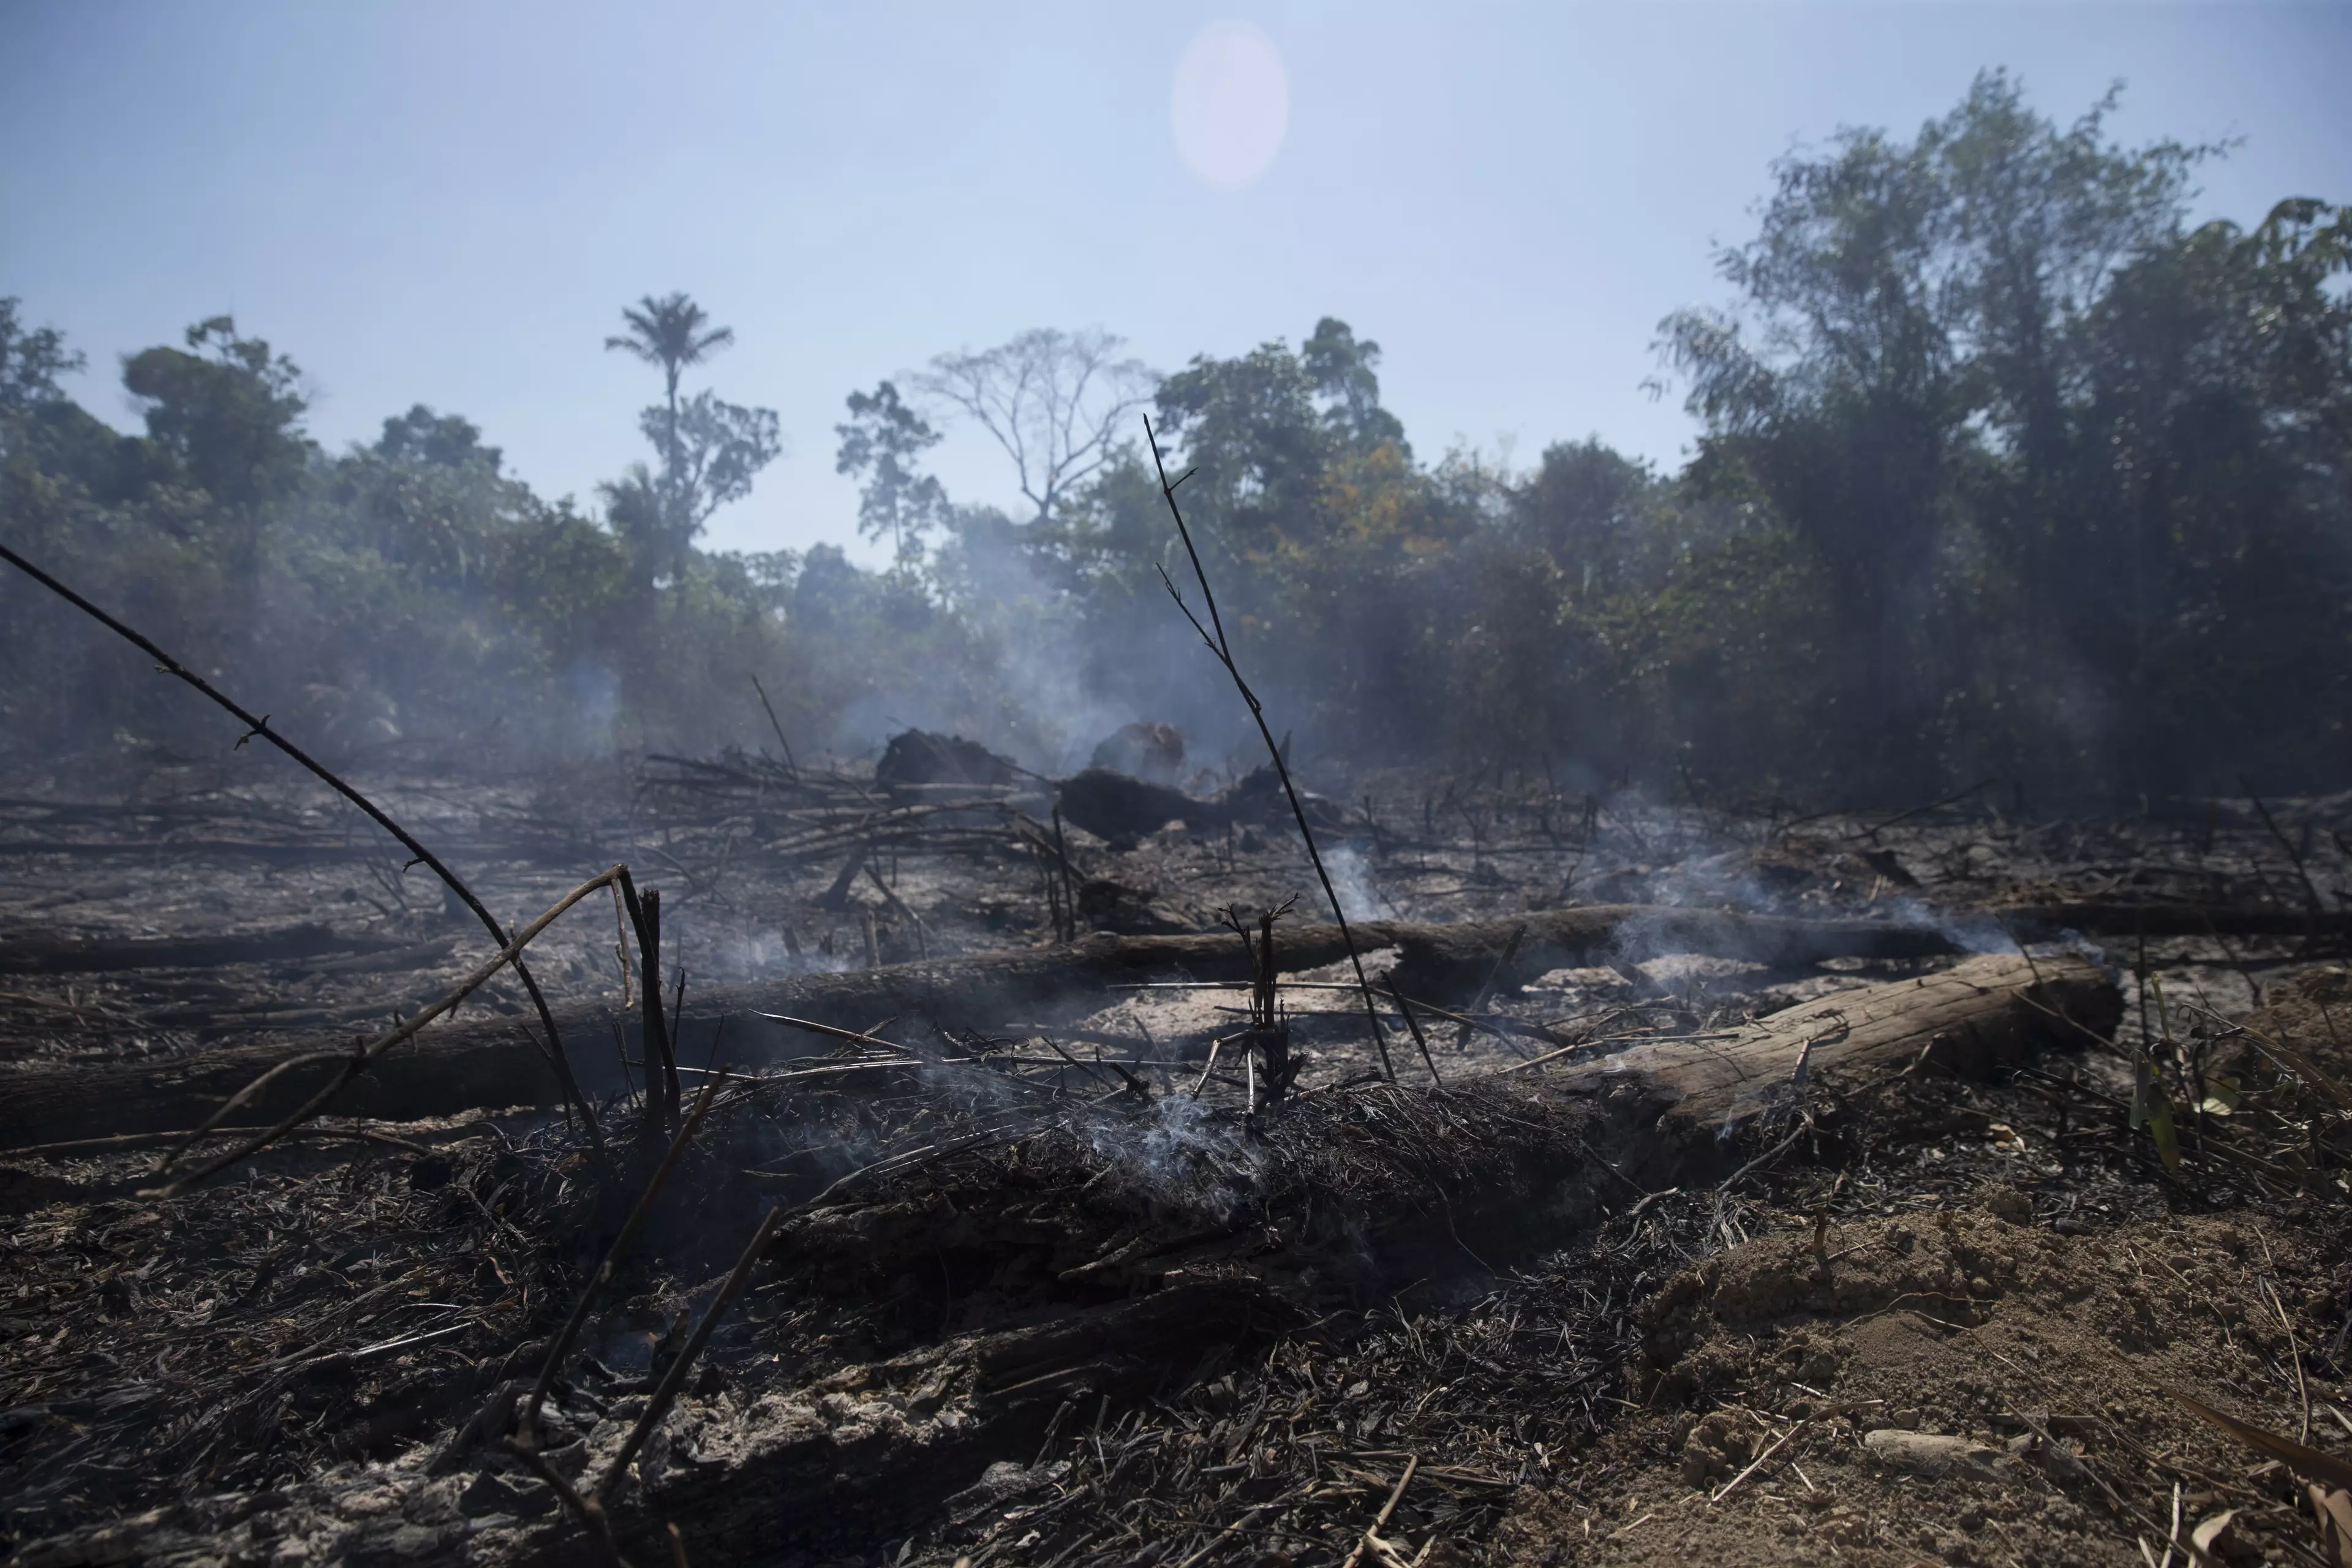 The Amazon rainforest after a fire in 2019 (